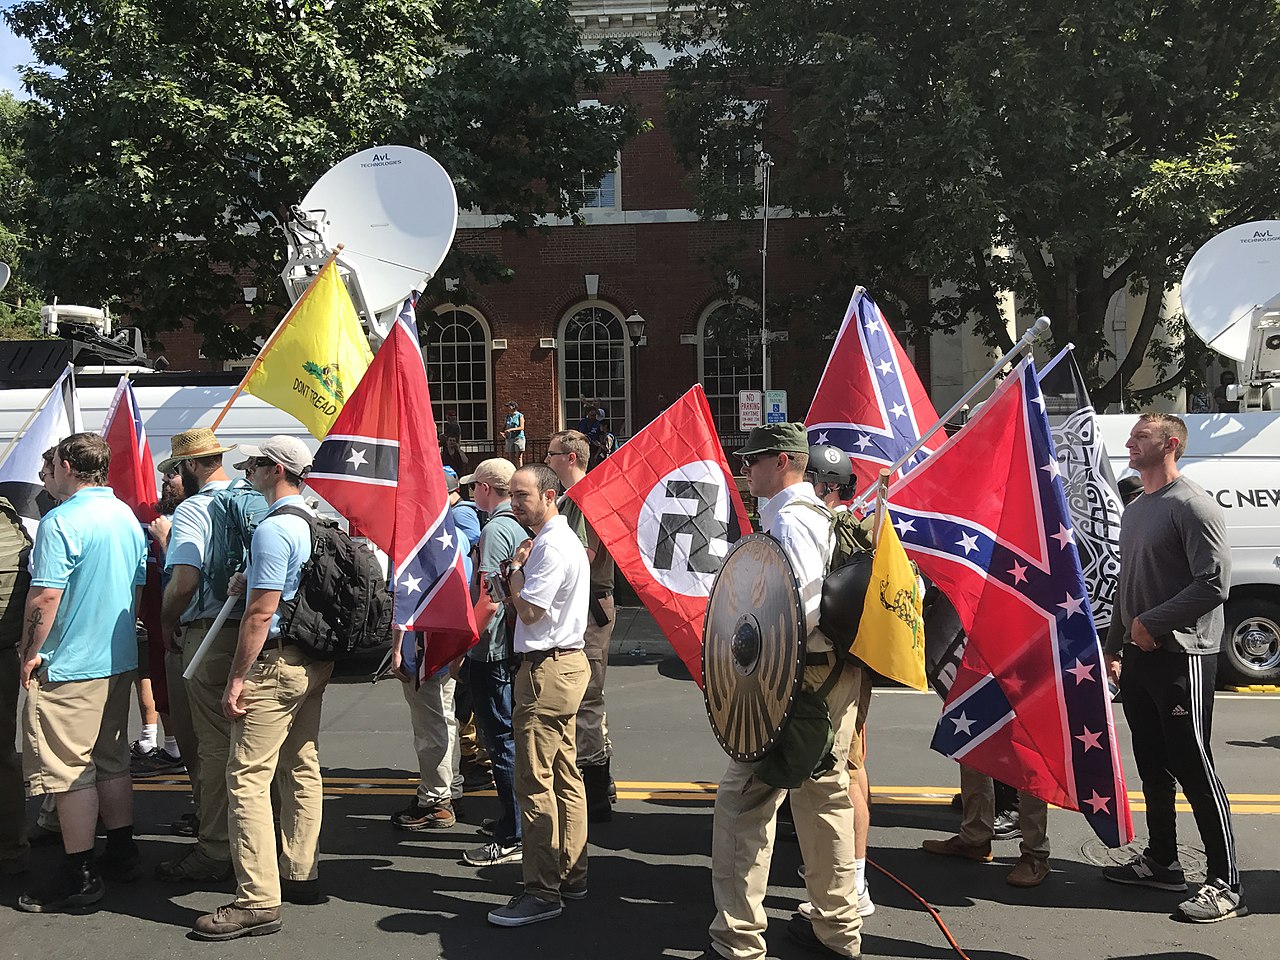 Anthony Crider (August 12, 2017), Charlottesville, “Unite the Right” Rally